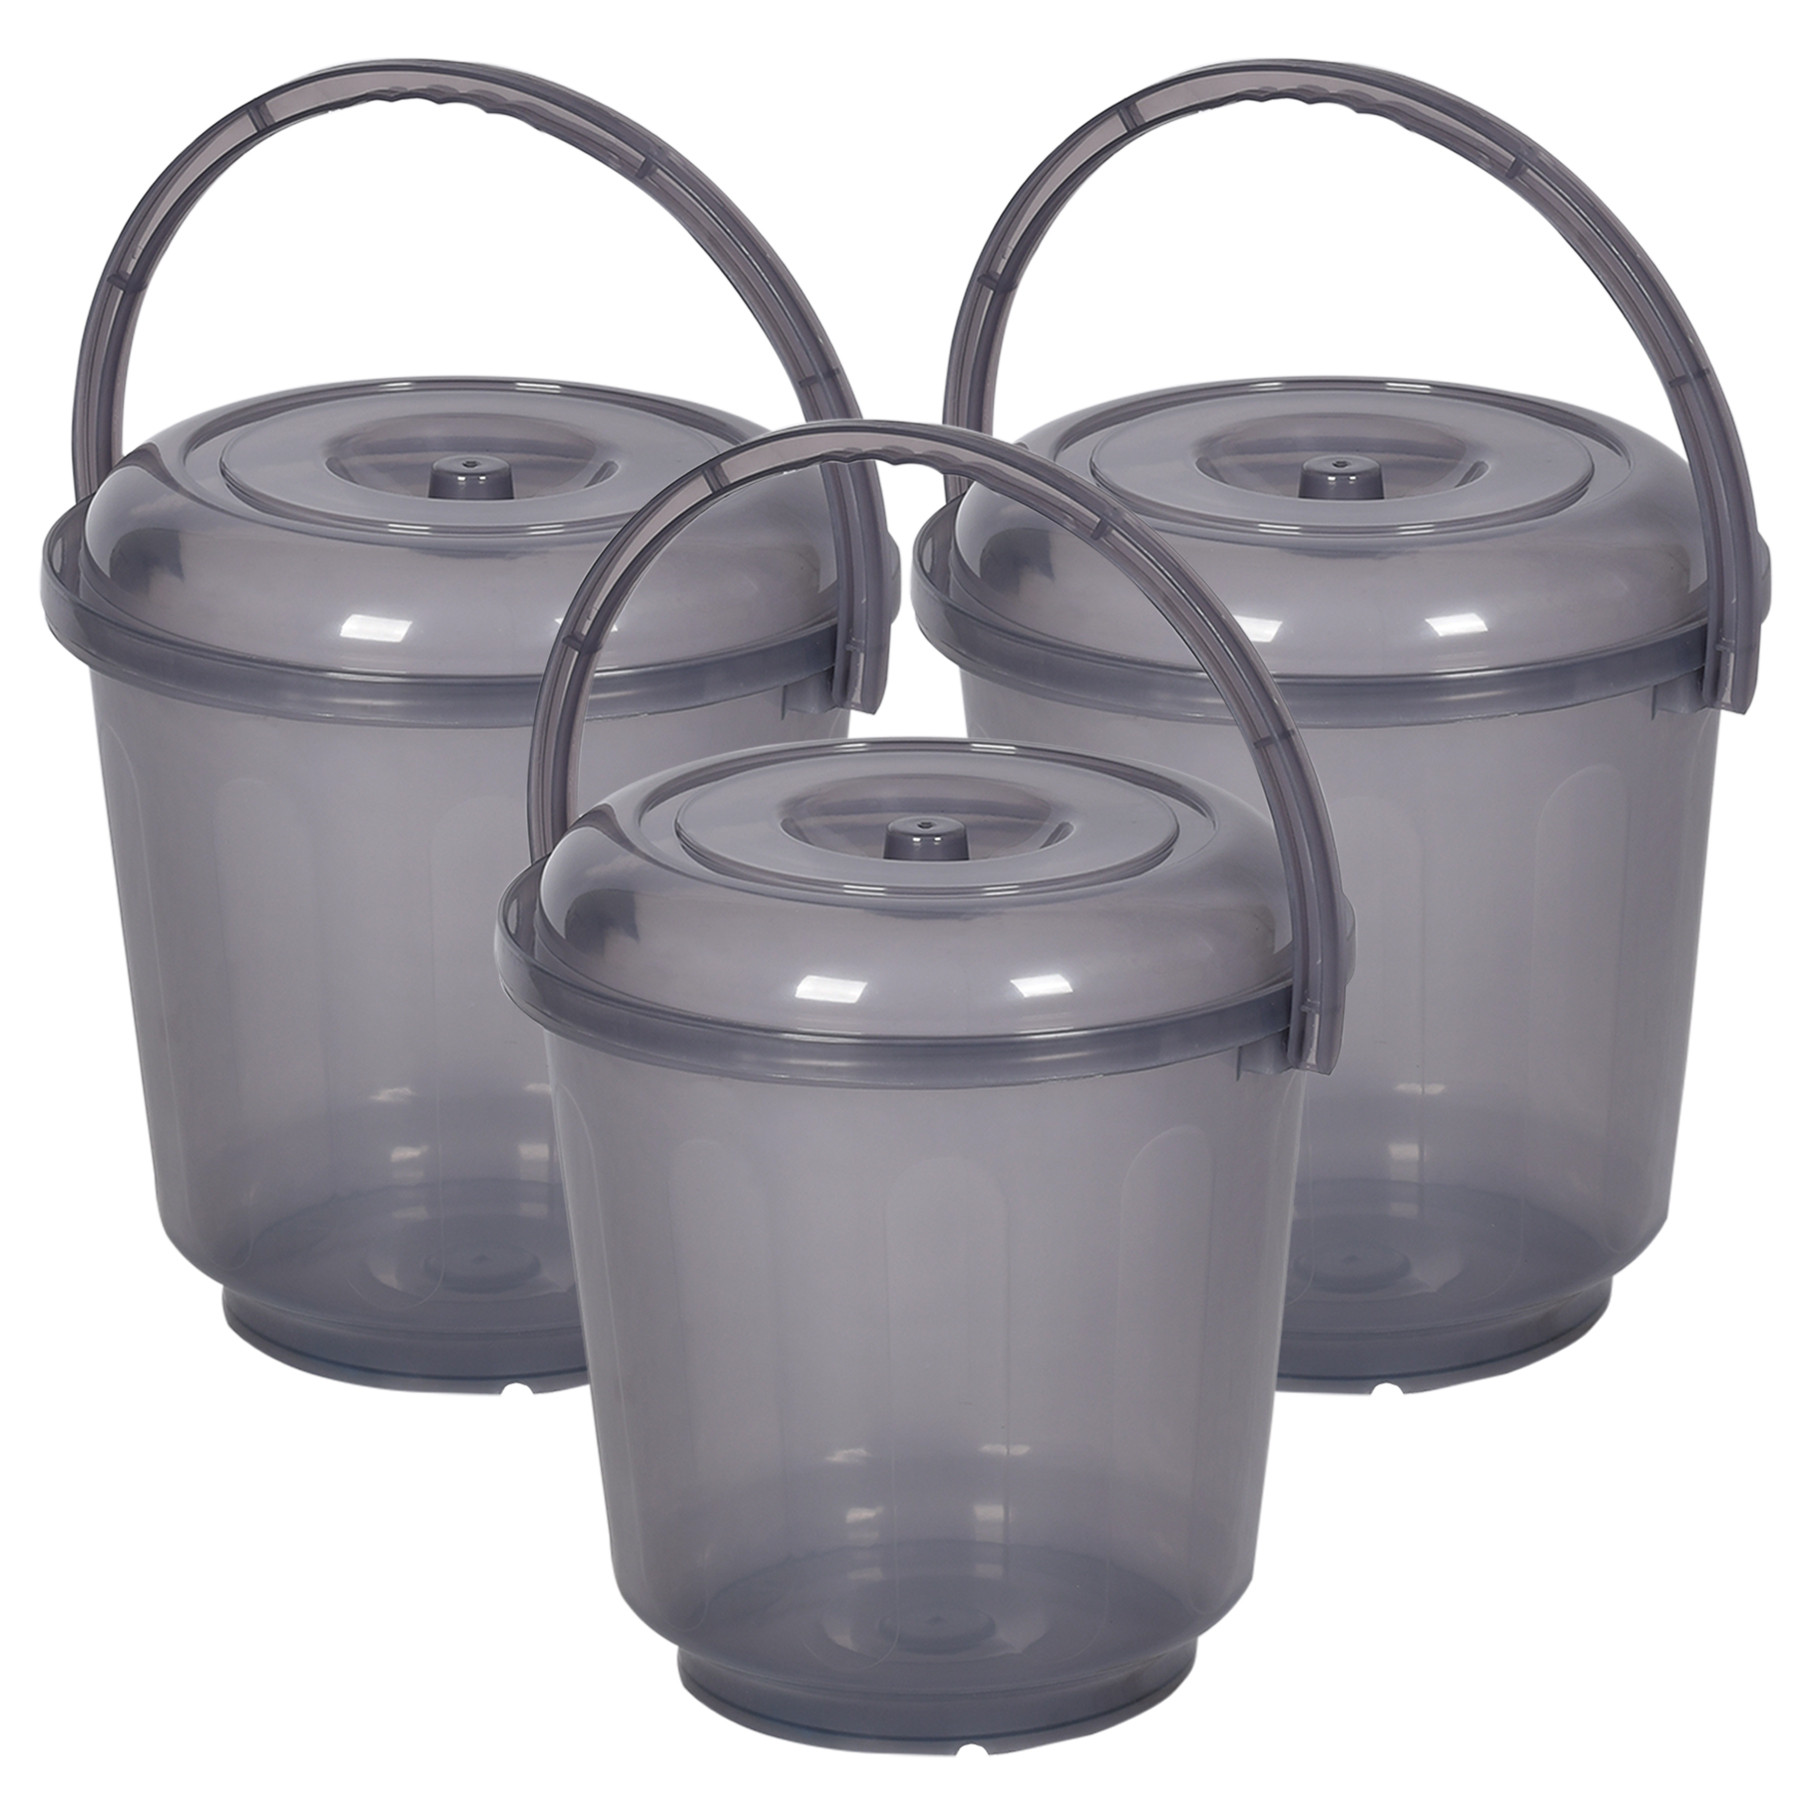 Kuber Industries Bucket | Bathroom Bucket | Utility Bucket for Daily Use | Bucket for Bathing | Water Storage Bucket | Bucket with Handle & Lid | 13 LTR | SUPER-013 | Transparent Gray